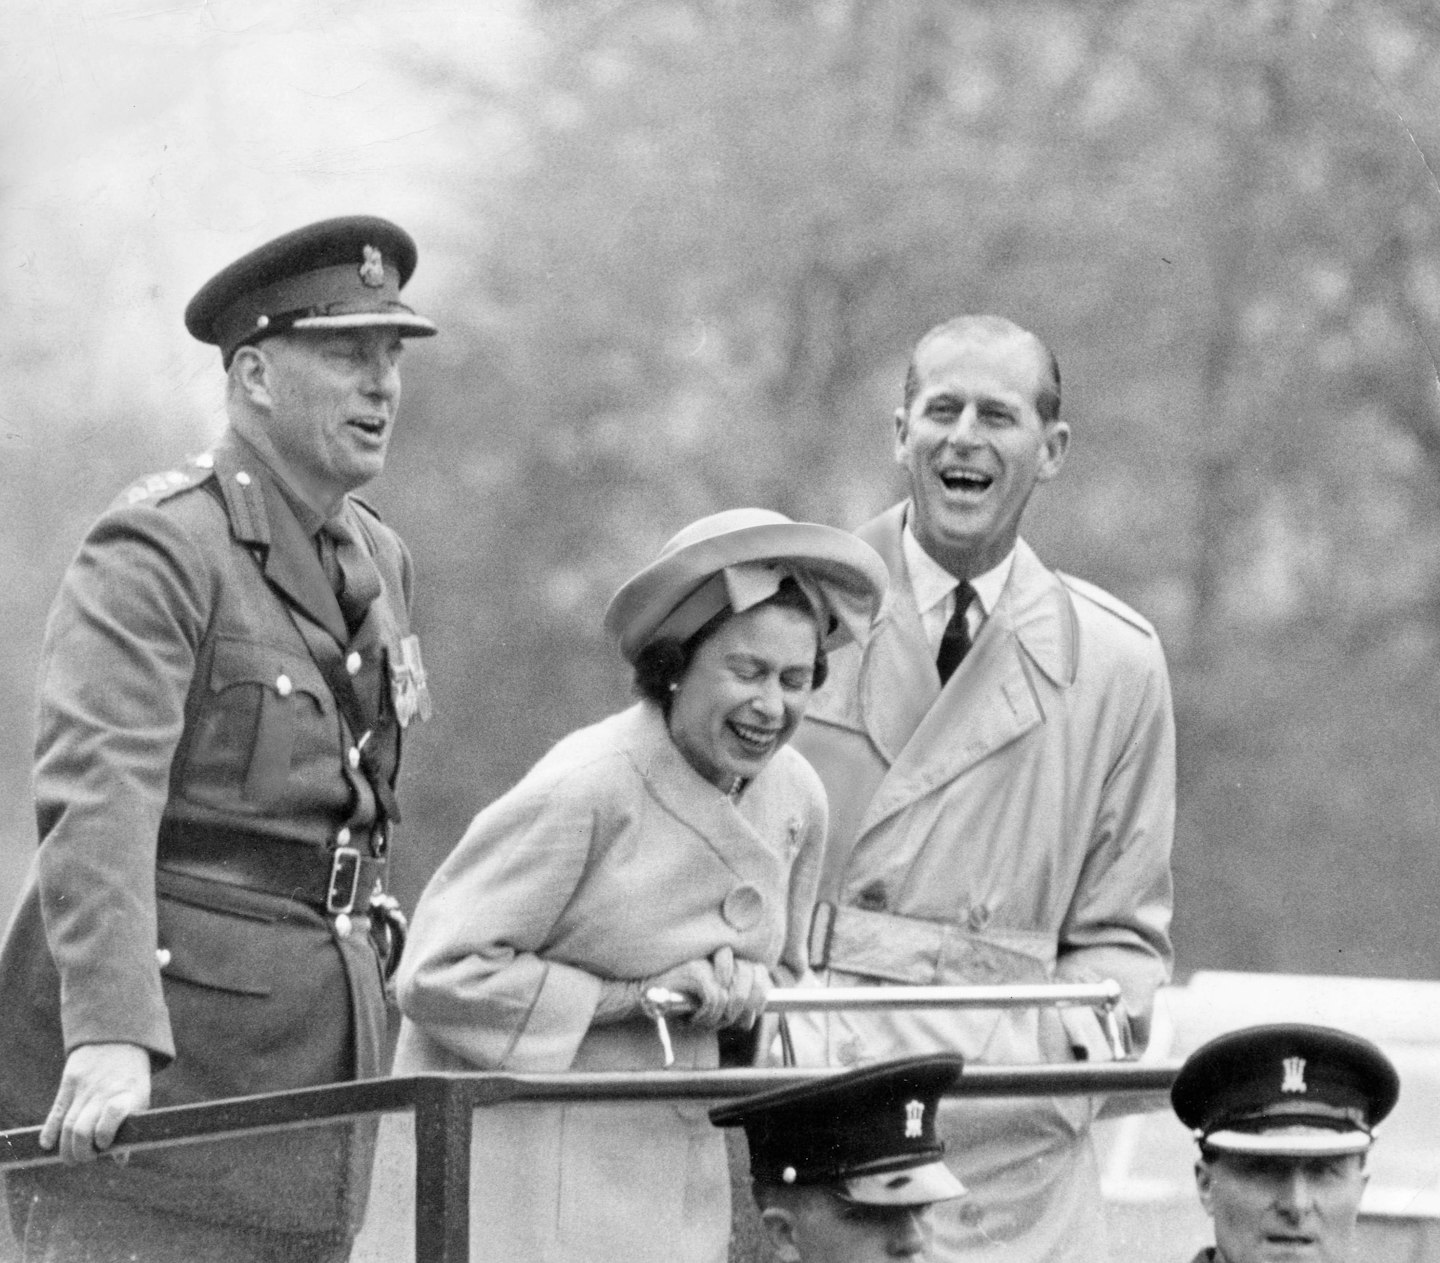 Queen Elizabeth II with her husband Prince Philip laughing